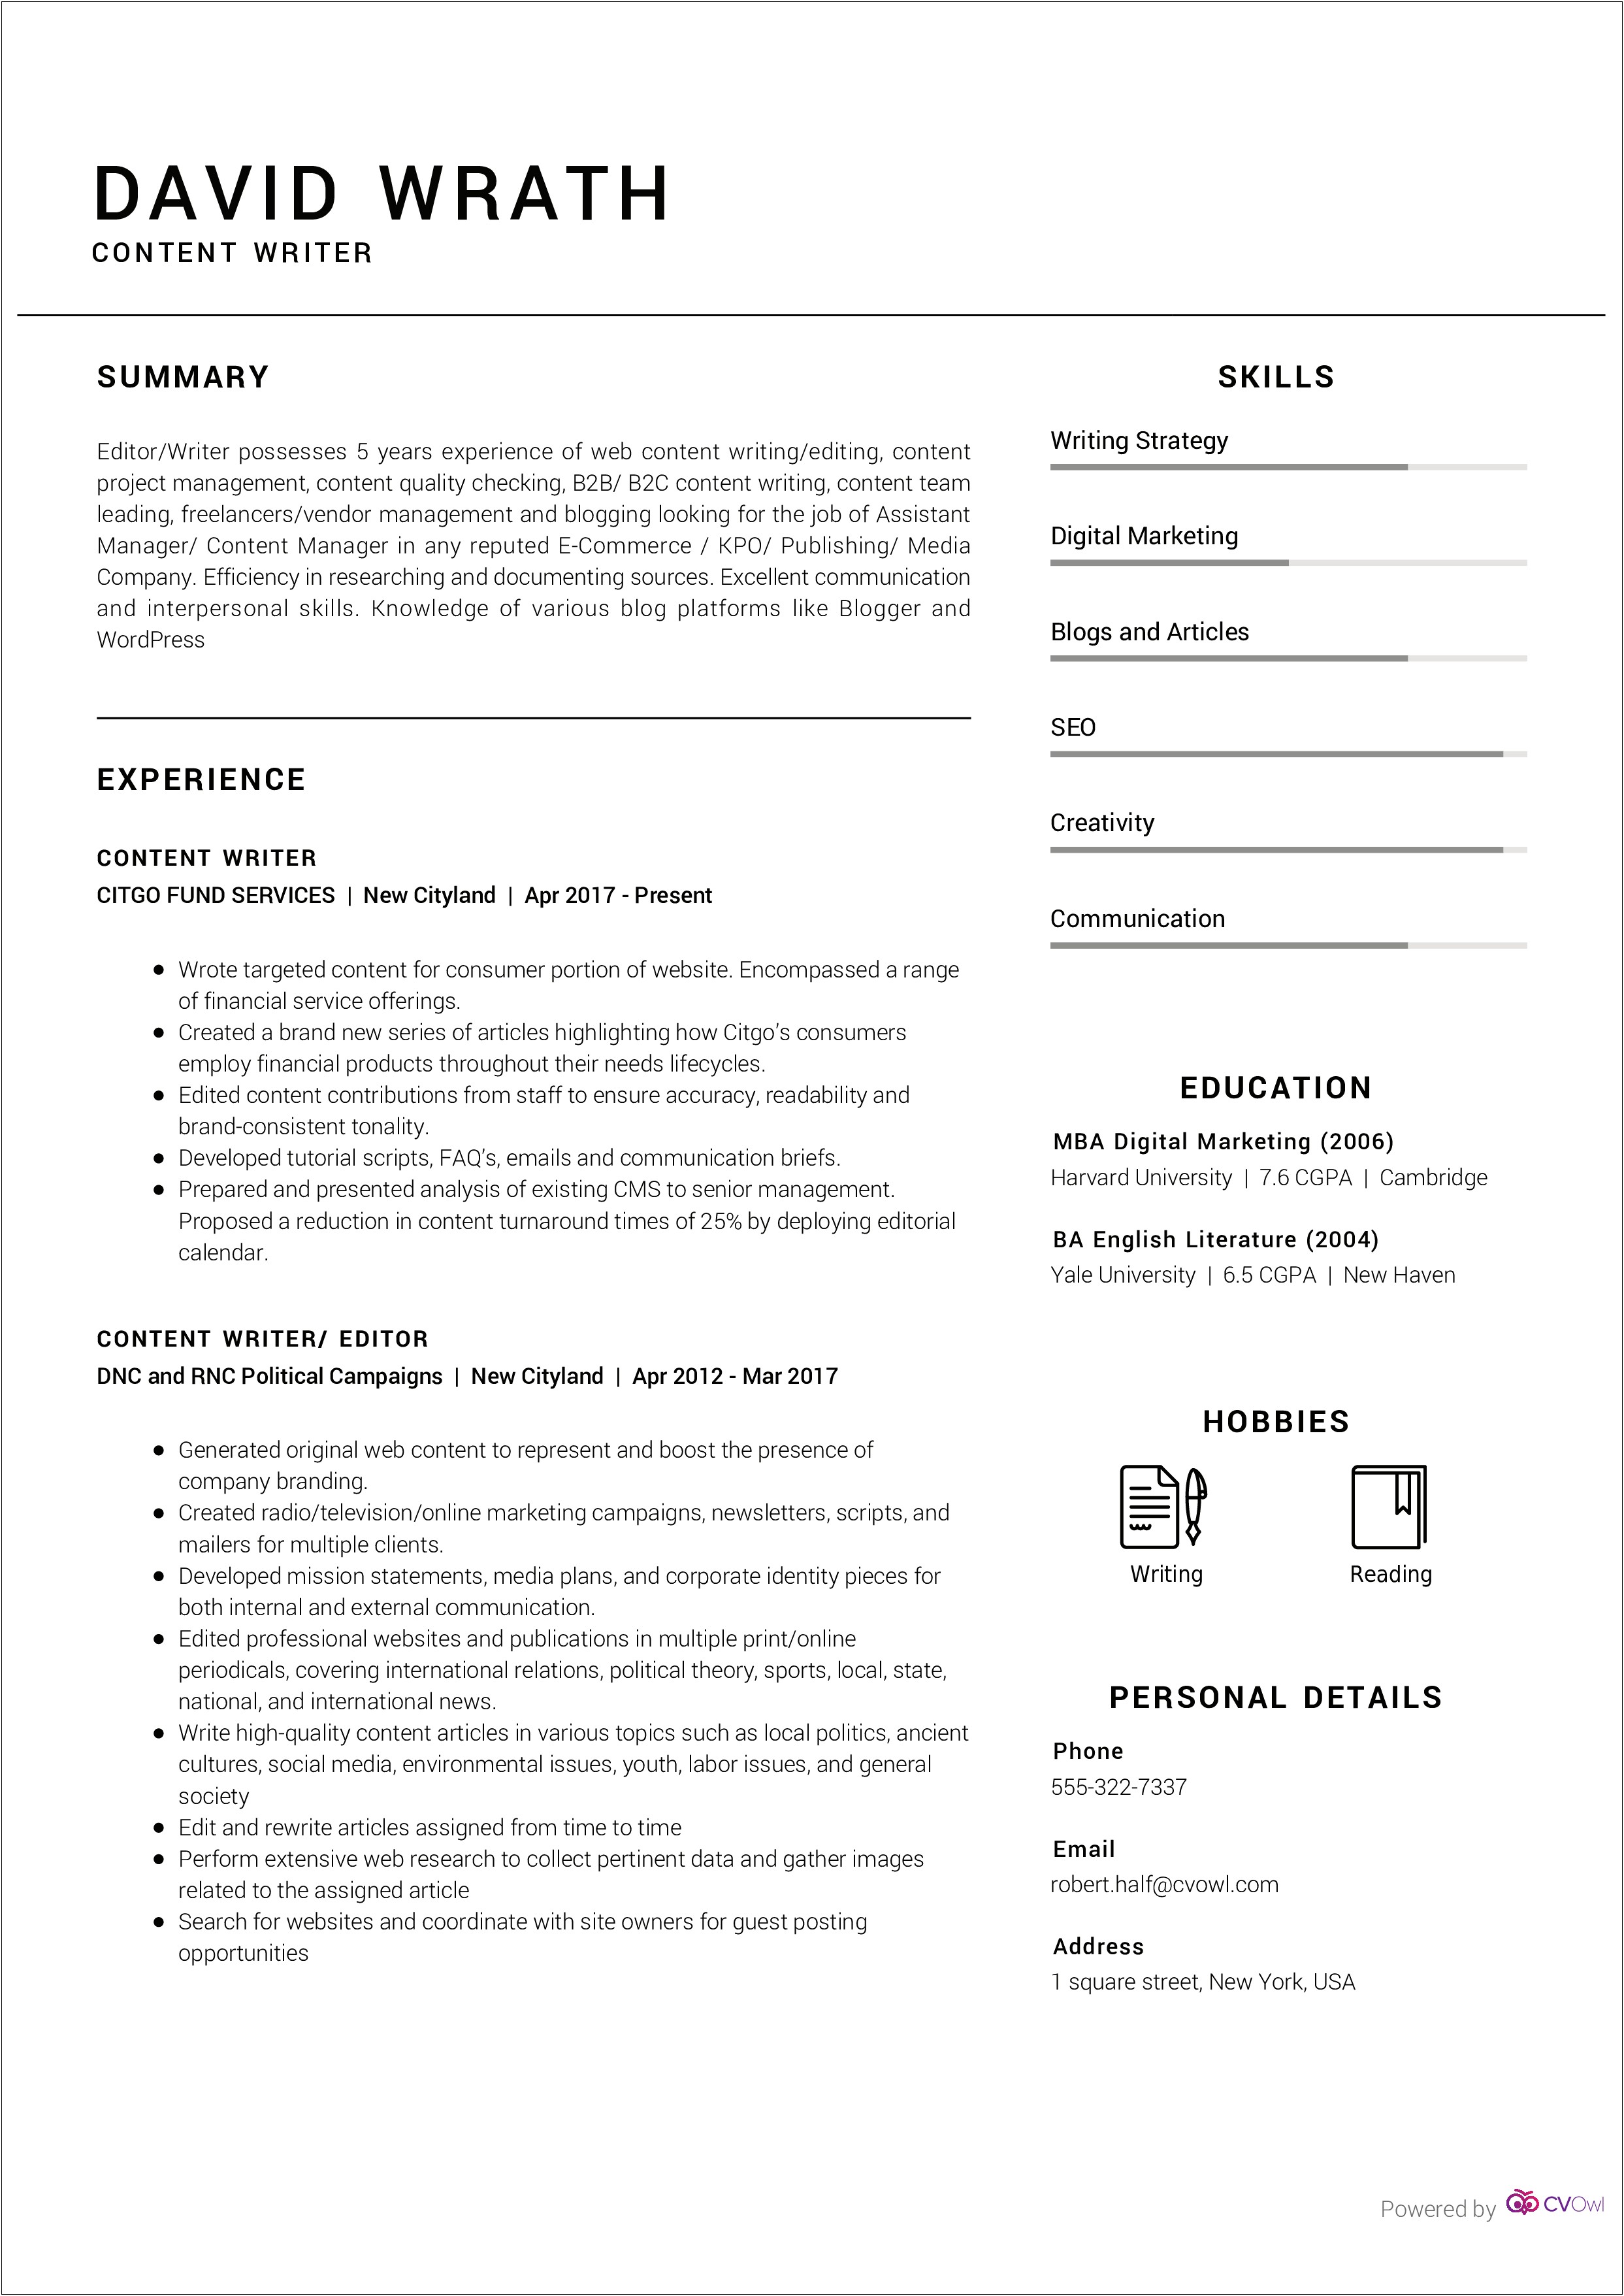 Best Resume For Content Writer